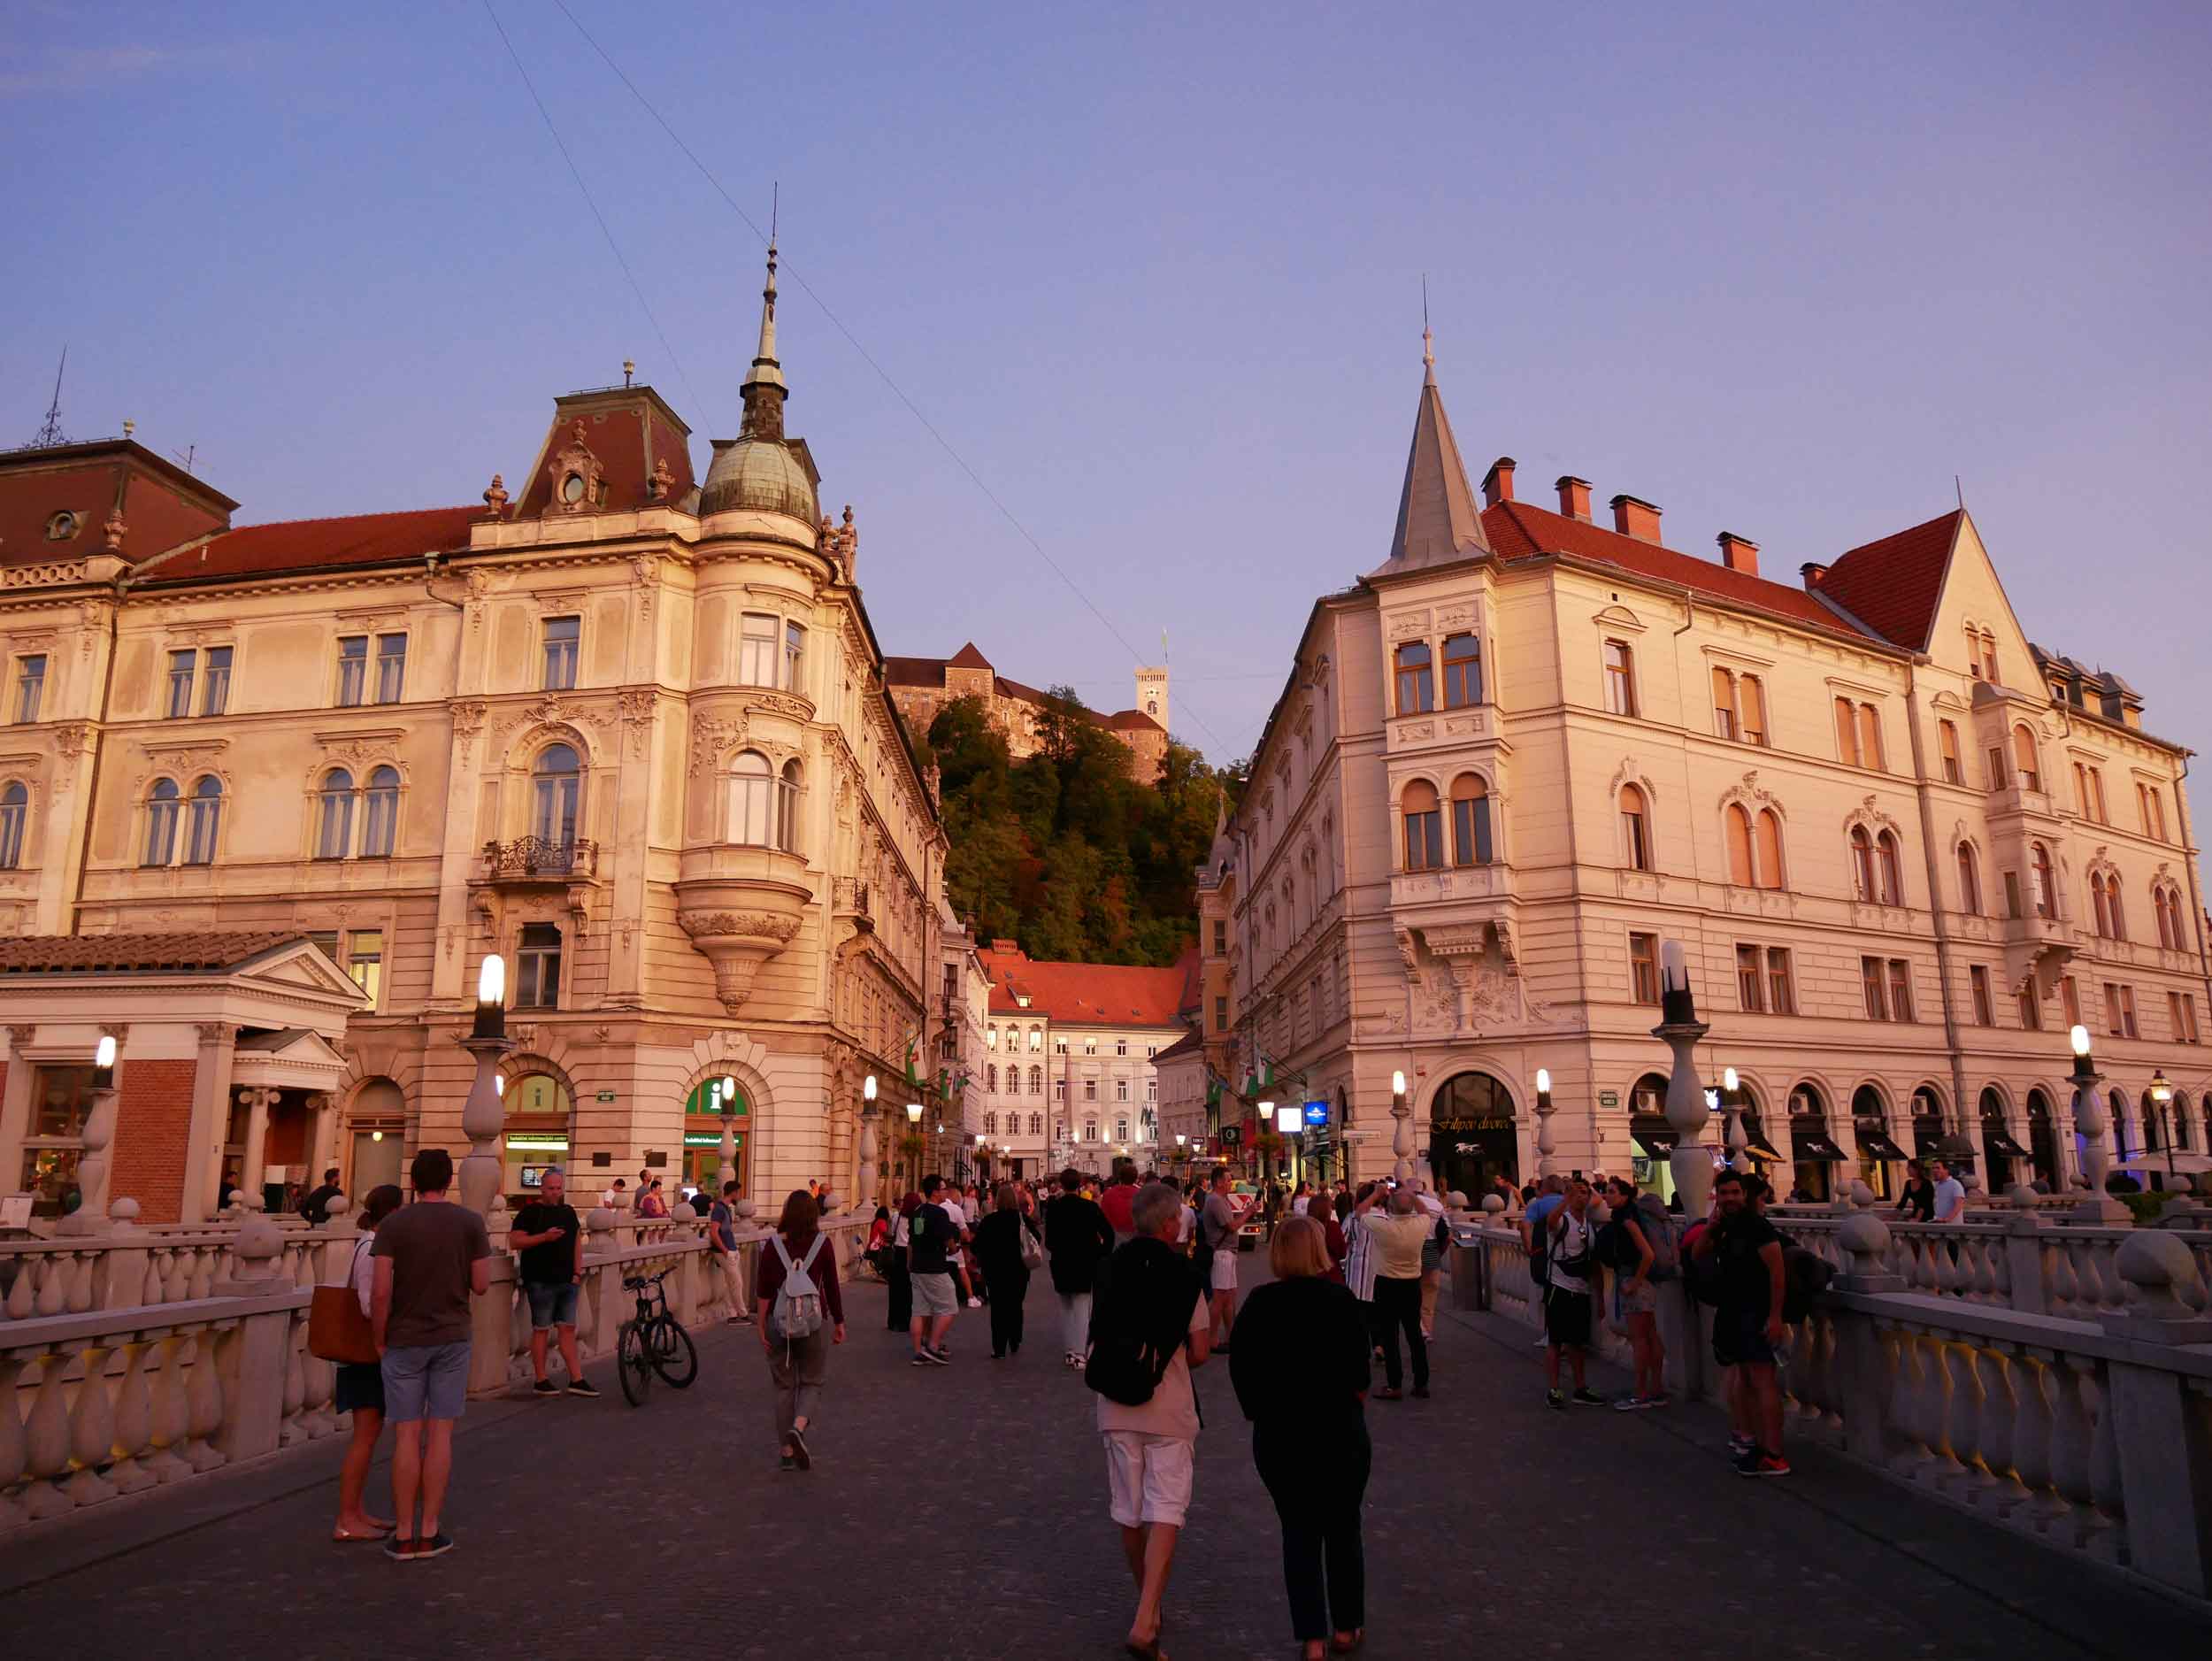  Sunsets throughout our time in the Balkans impressed, but we couldn't think of a lovelier place to end our journey than here in delightful Ljubljana.&nbsp; 